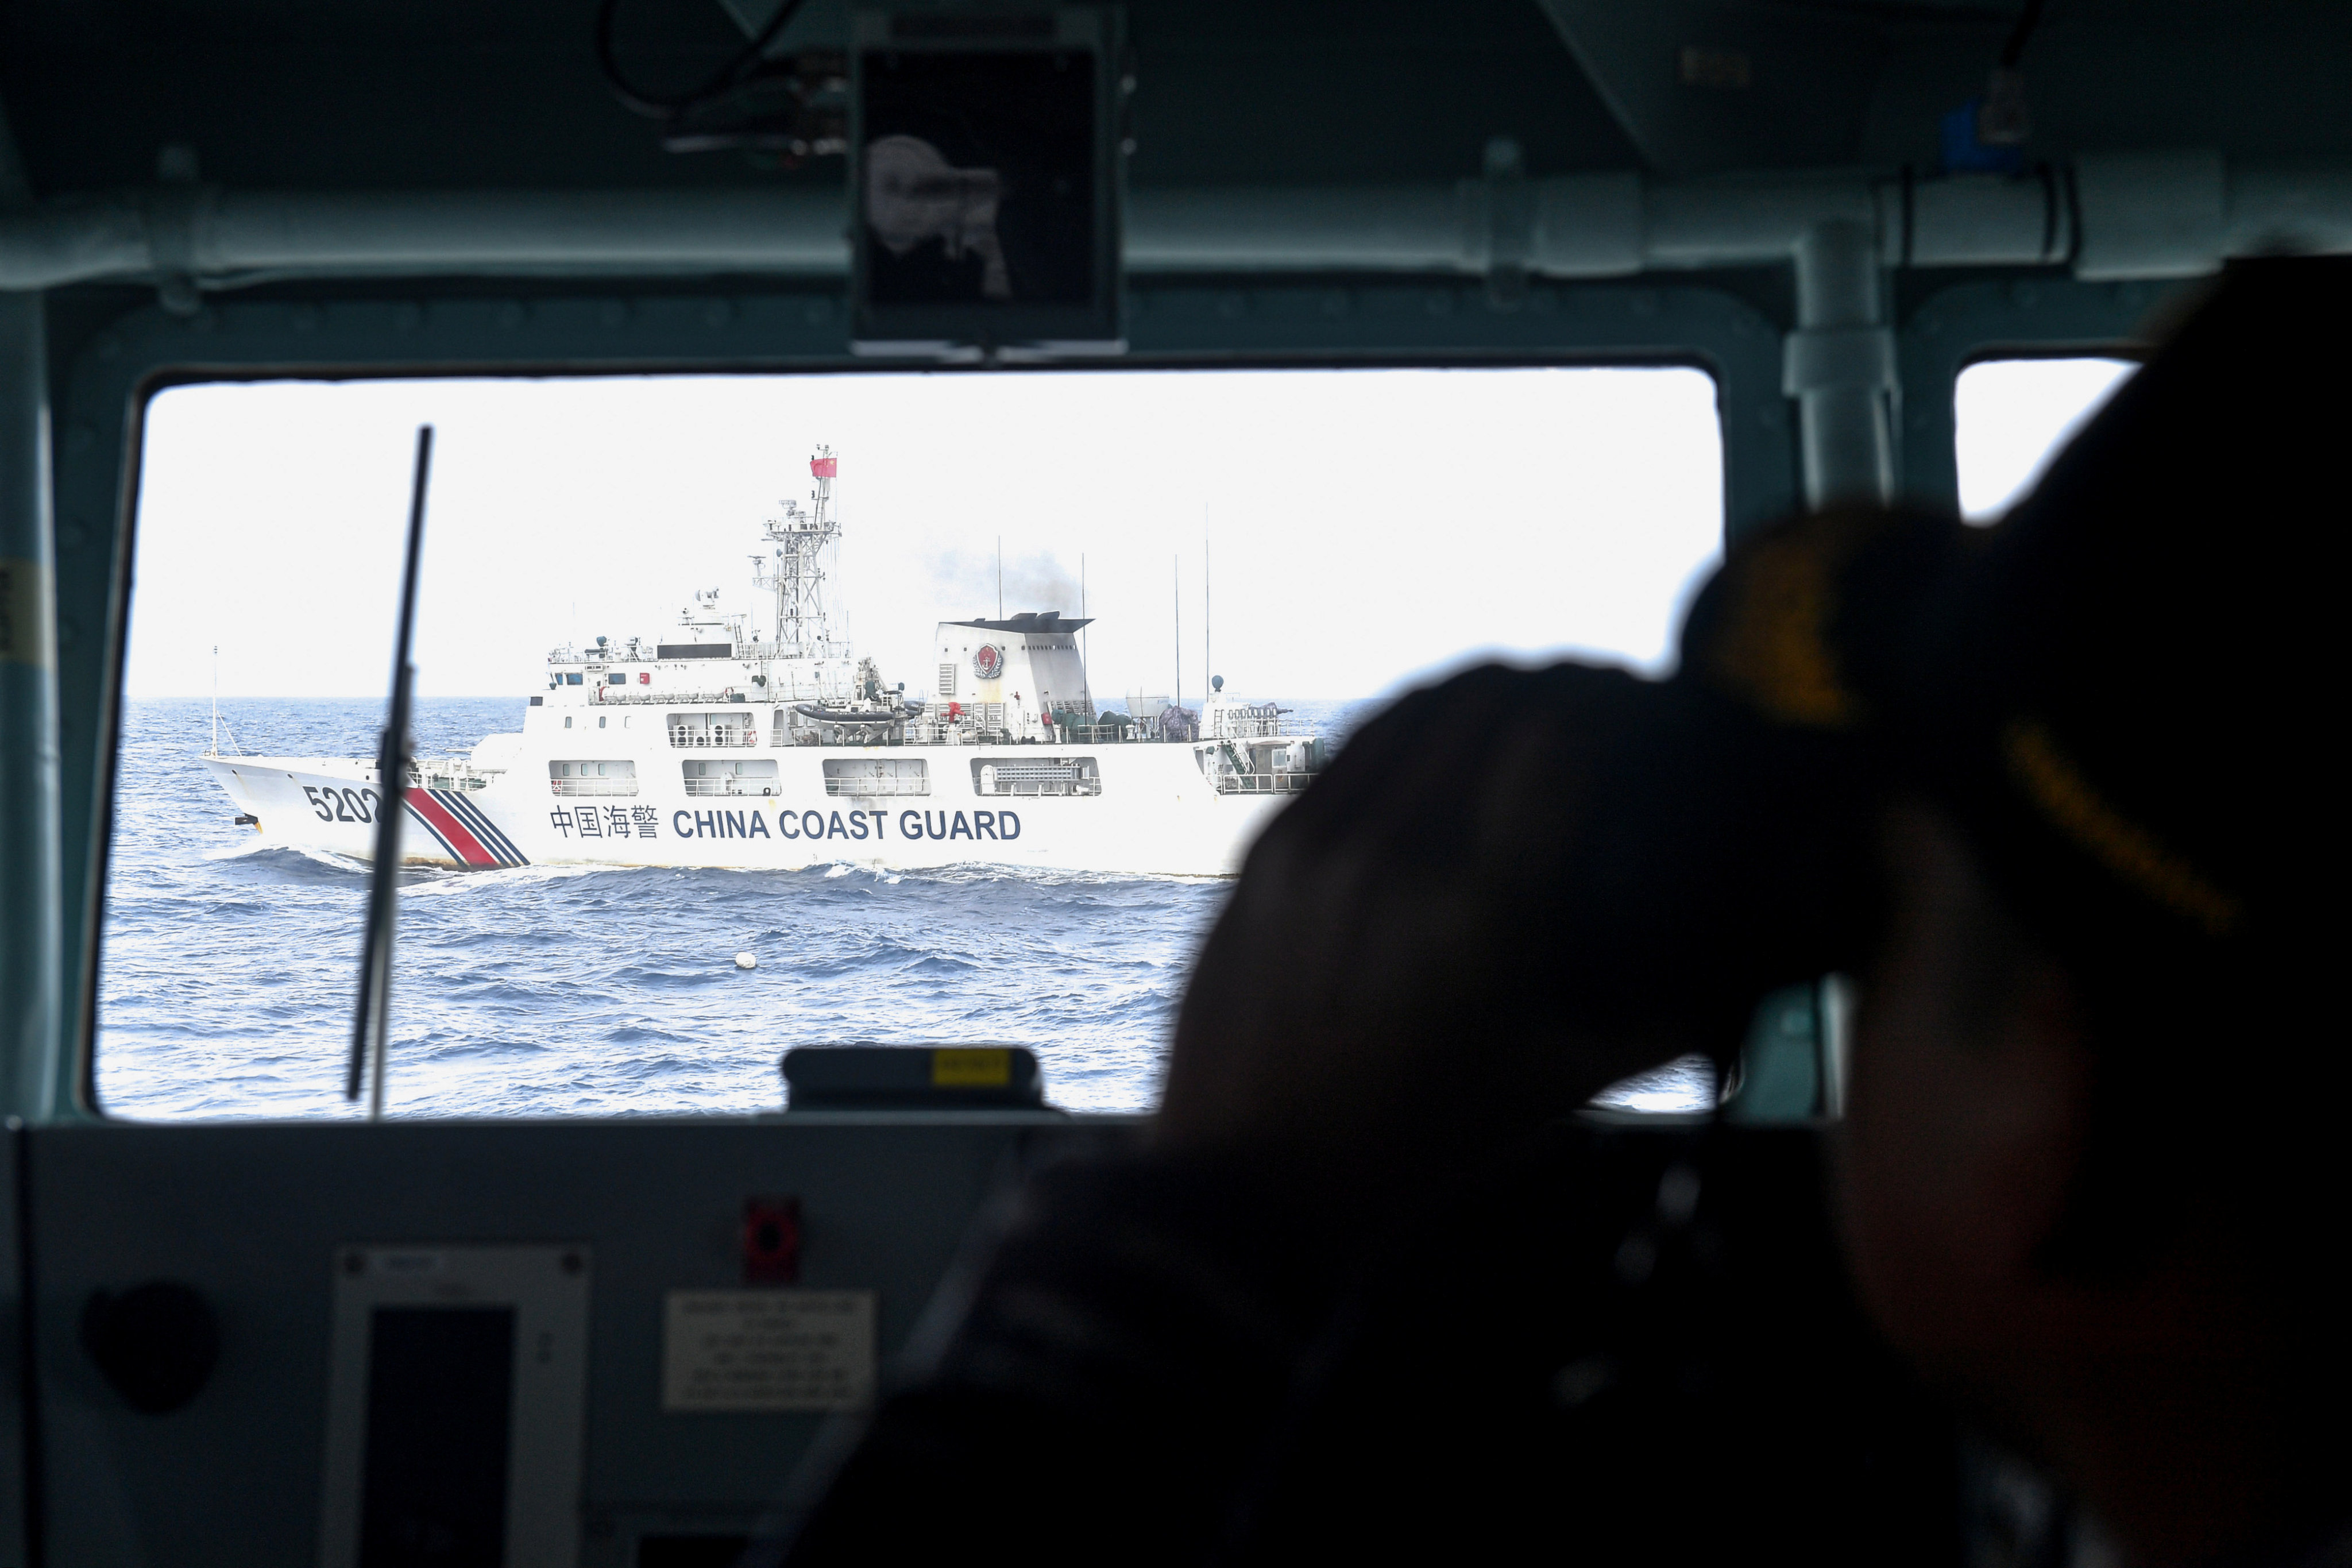 A China Coast Guard ship is seen from an Indonesian naval ship during a patrol on January 11, 2020. Photo: Antara Foto/Reuters